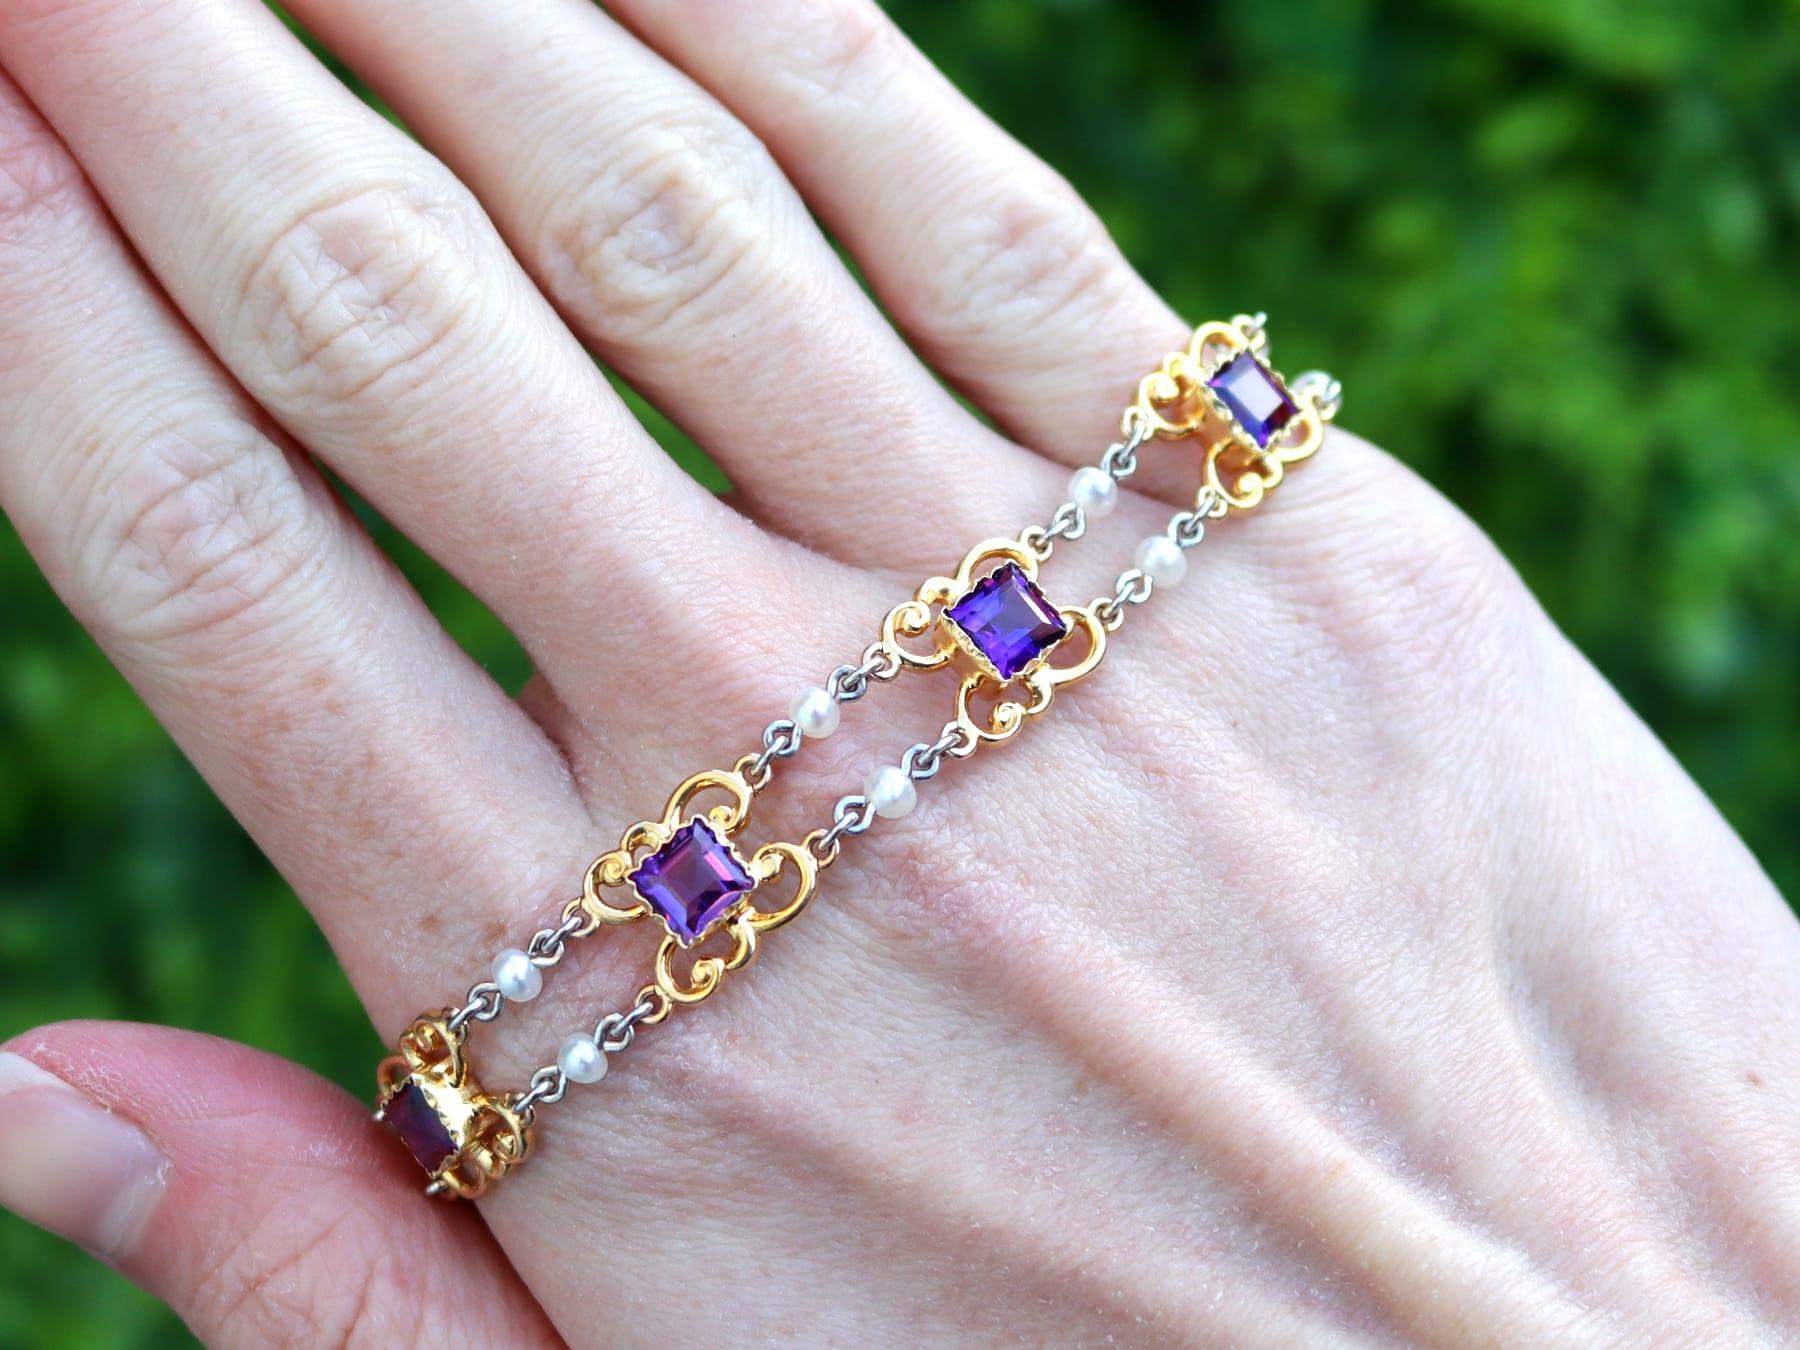 An exceptional, fine and impressive antique 5.25 carat amethyst, and pearl, 15 karat yellow gold and platinum bracelet; part of our diverse antique Edwardian jewelry and estate jewelry collections.

This exceptional antique bracelet has been crafted